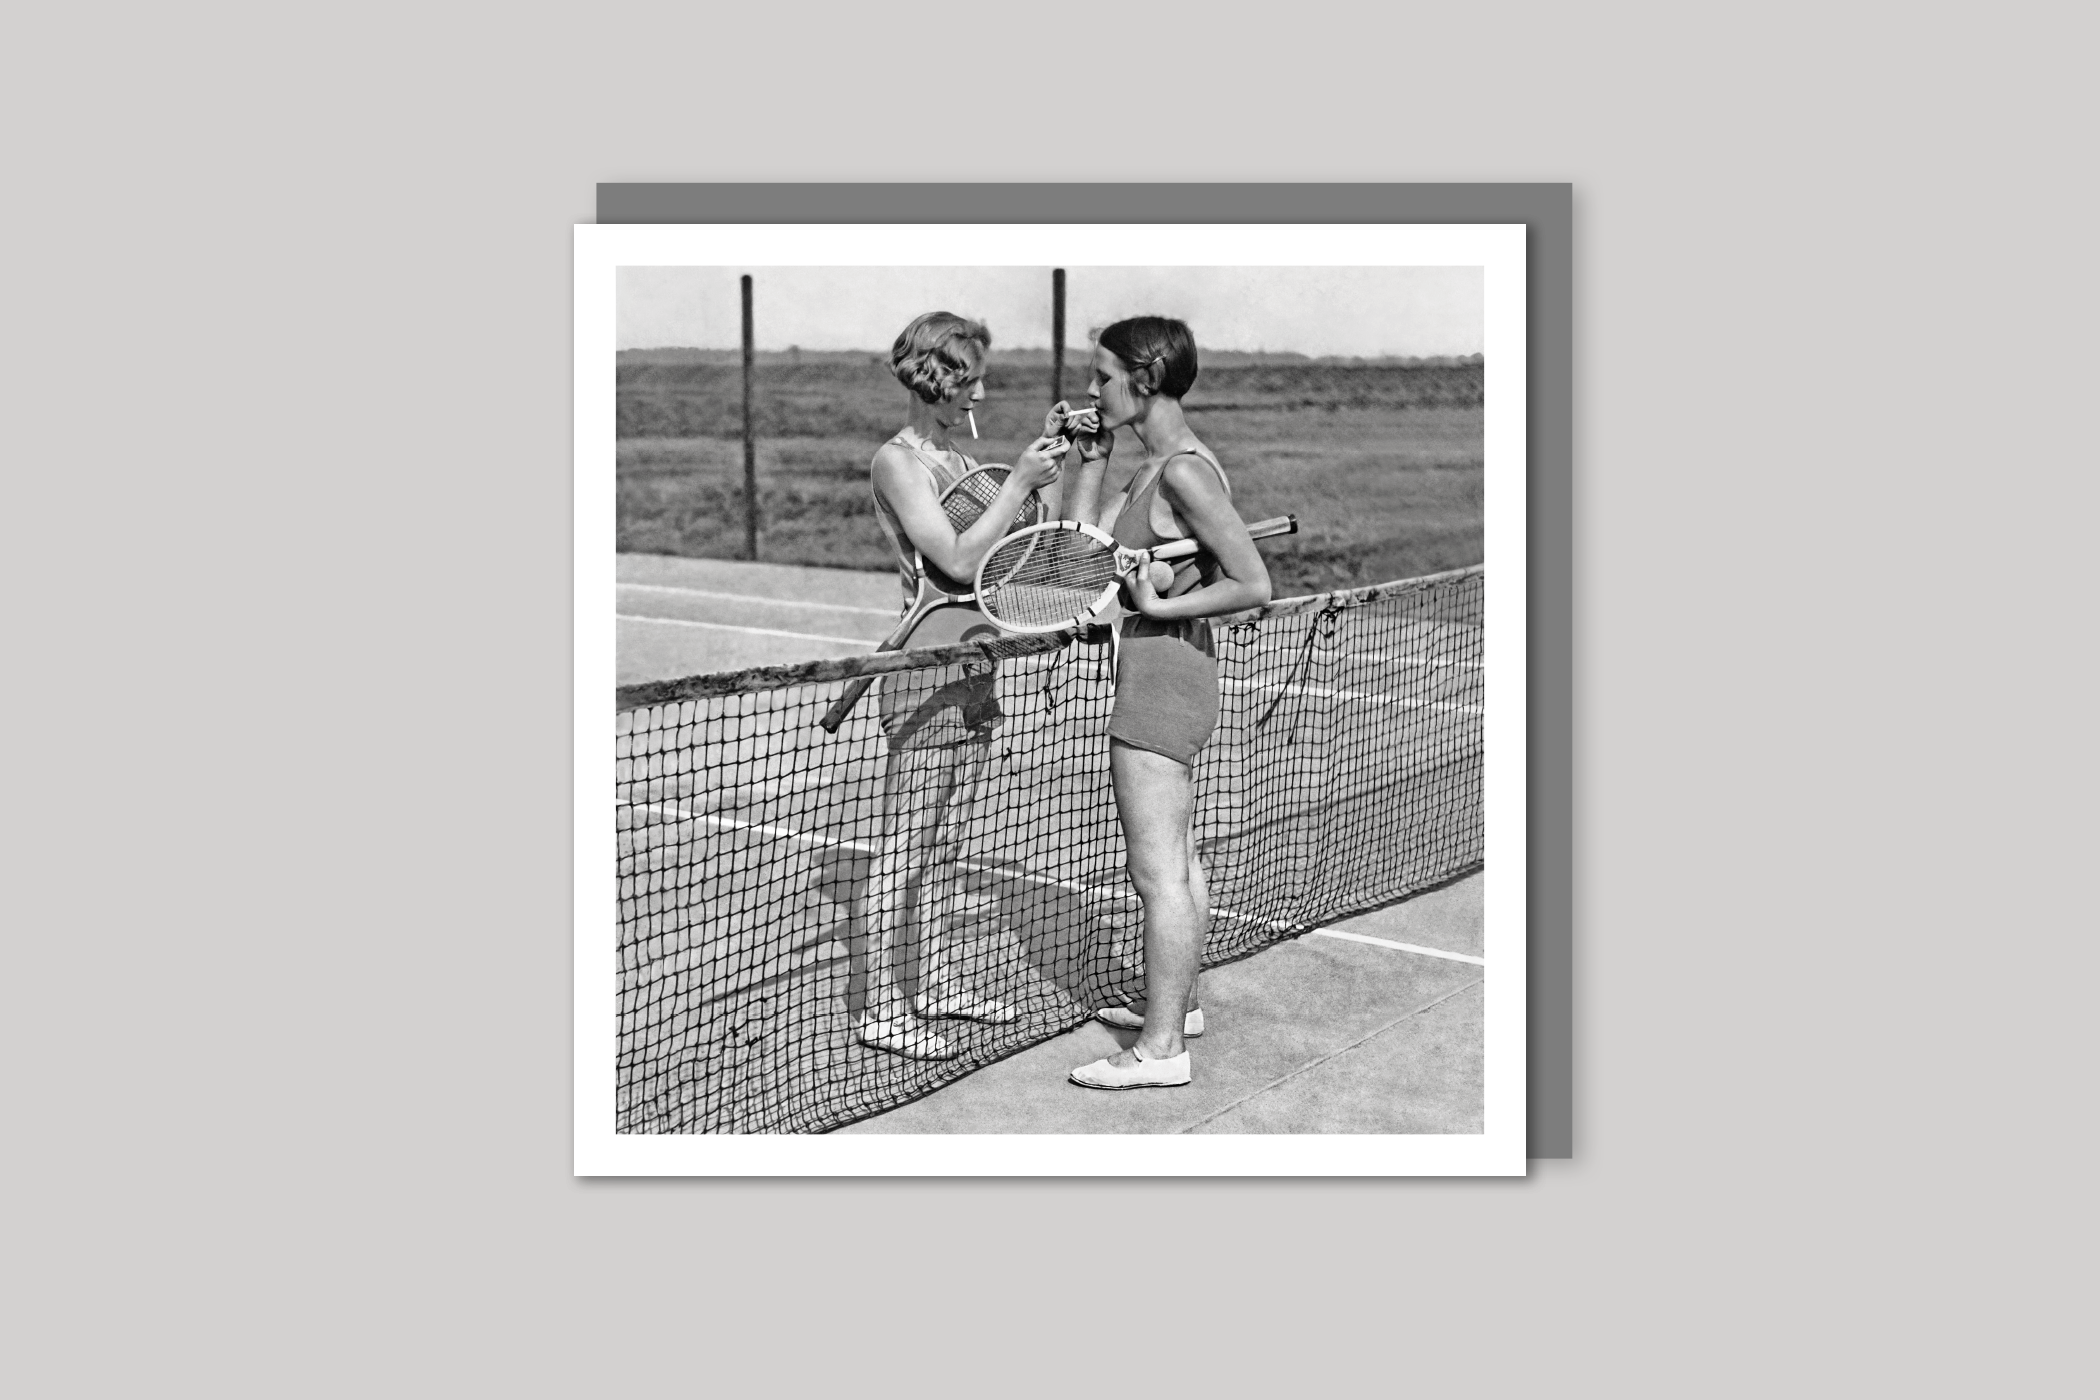 Match Point cool photography from Wavelength range of photographic cards by Icon, back page.